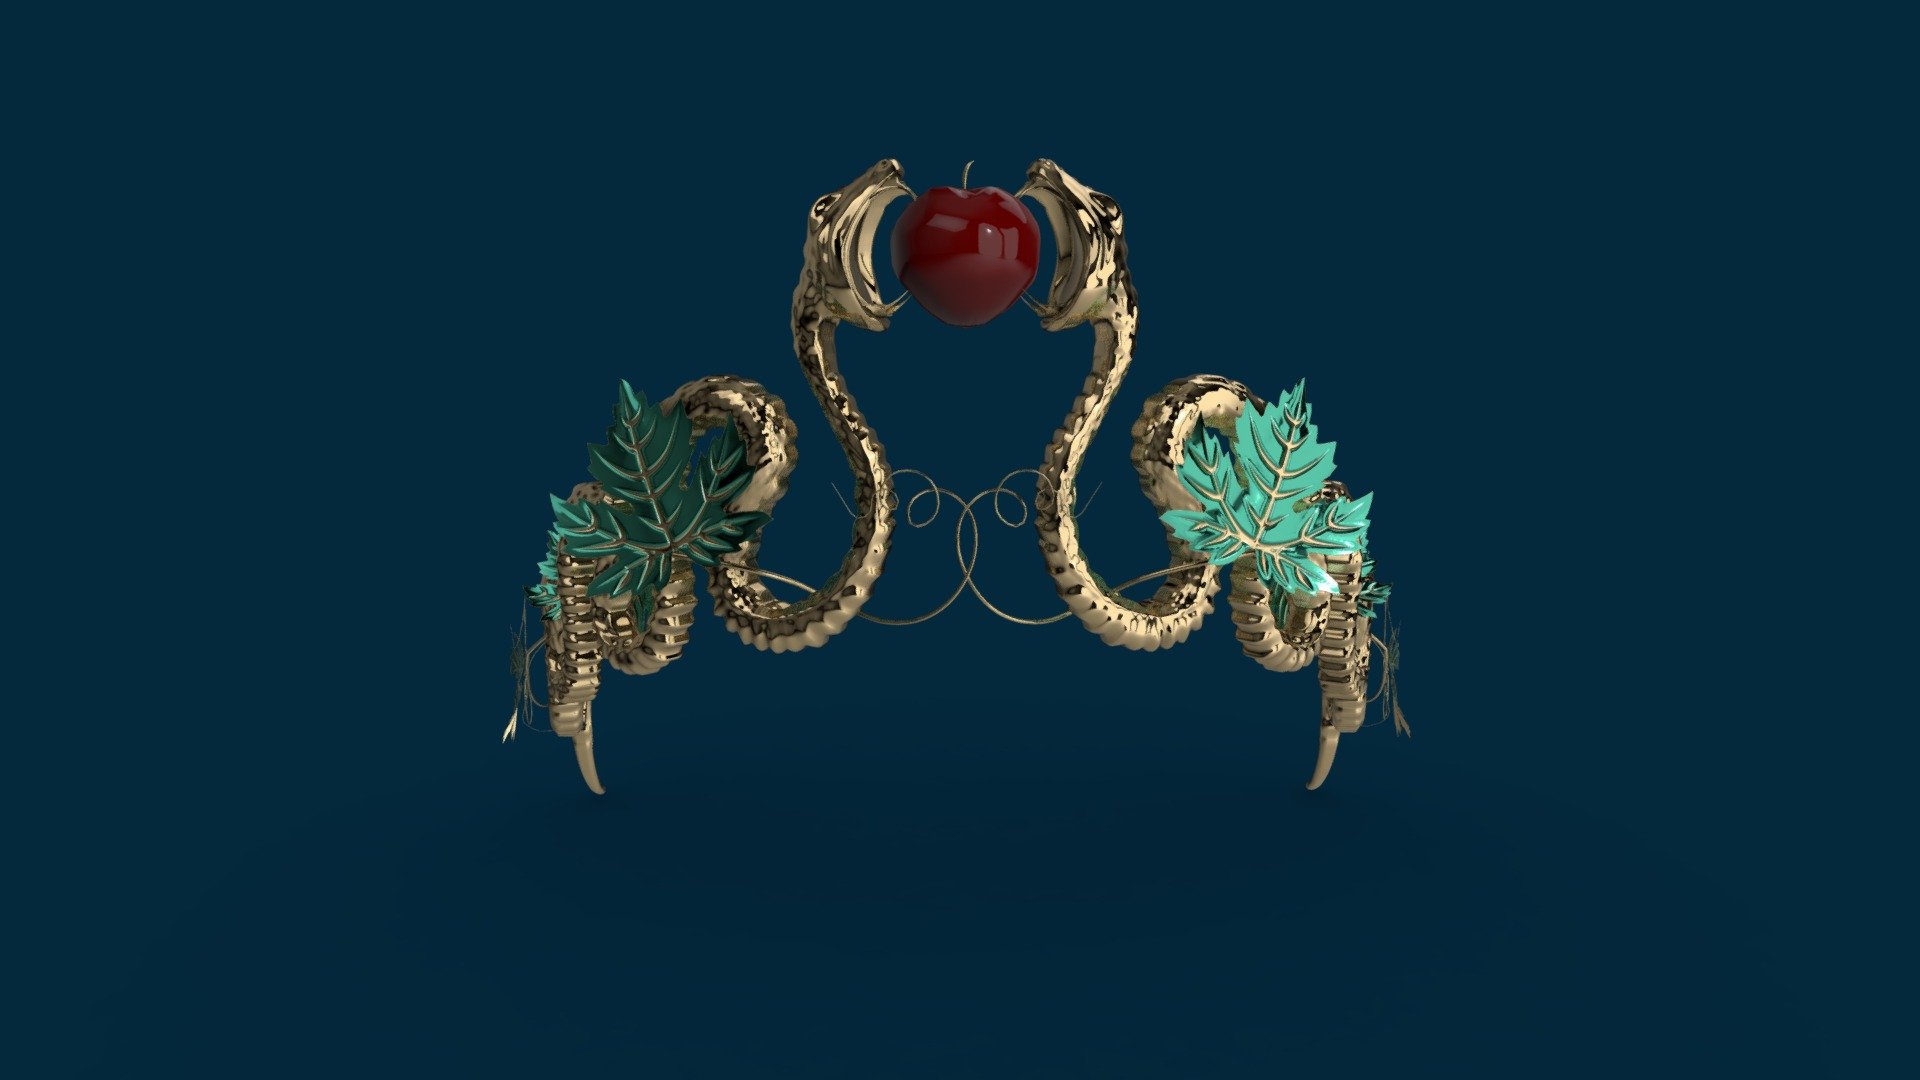 Inspired by the story of Adam and Eve in the garden of Eden I design this tiara. 
Two snakes wind in the vines byting a red apple.
An unreleased tiara sketch by the jewelry house CHAUMET served me as an inspiration for the snakes 3d model